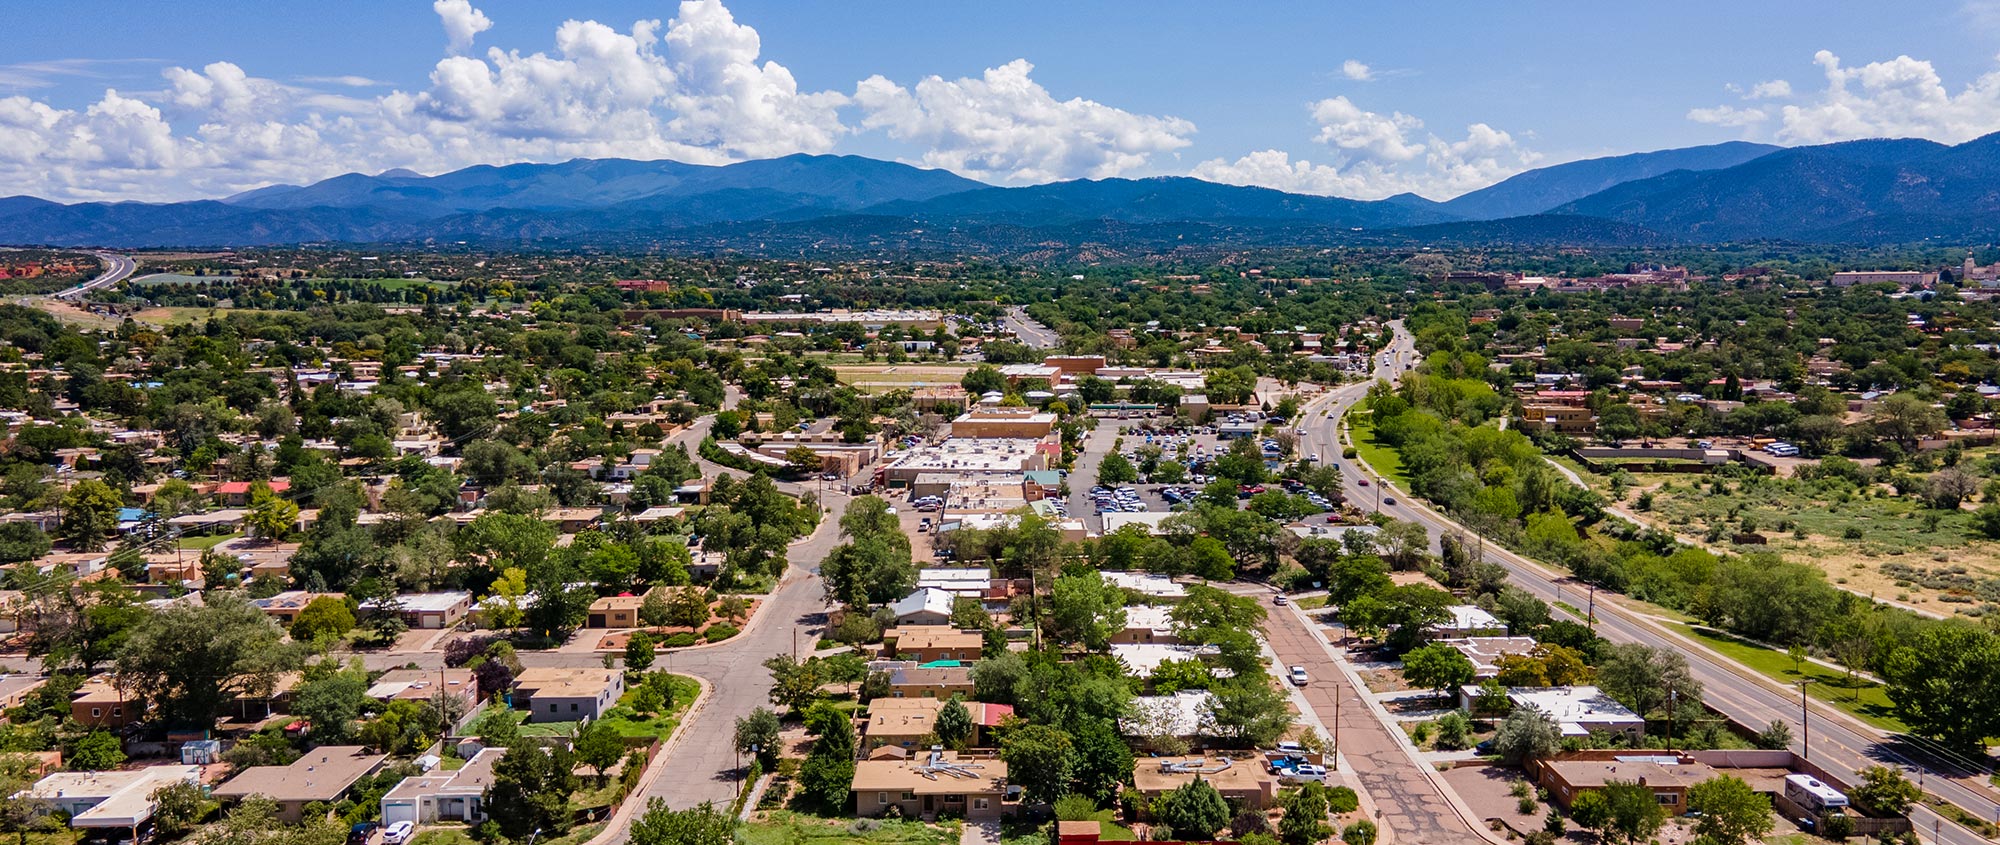 Aerial view of Santa Fe which includes many of it's subdivisions.